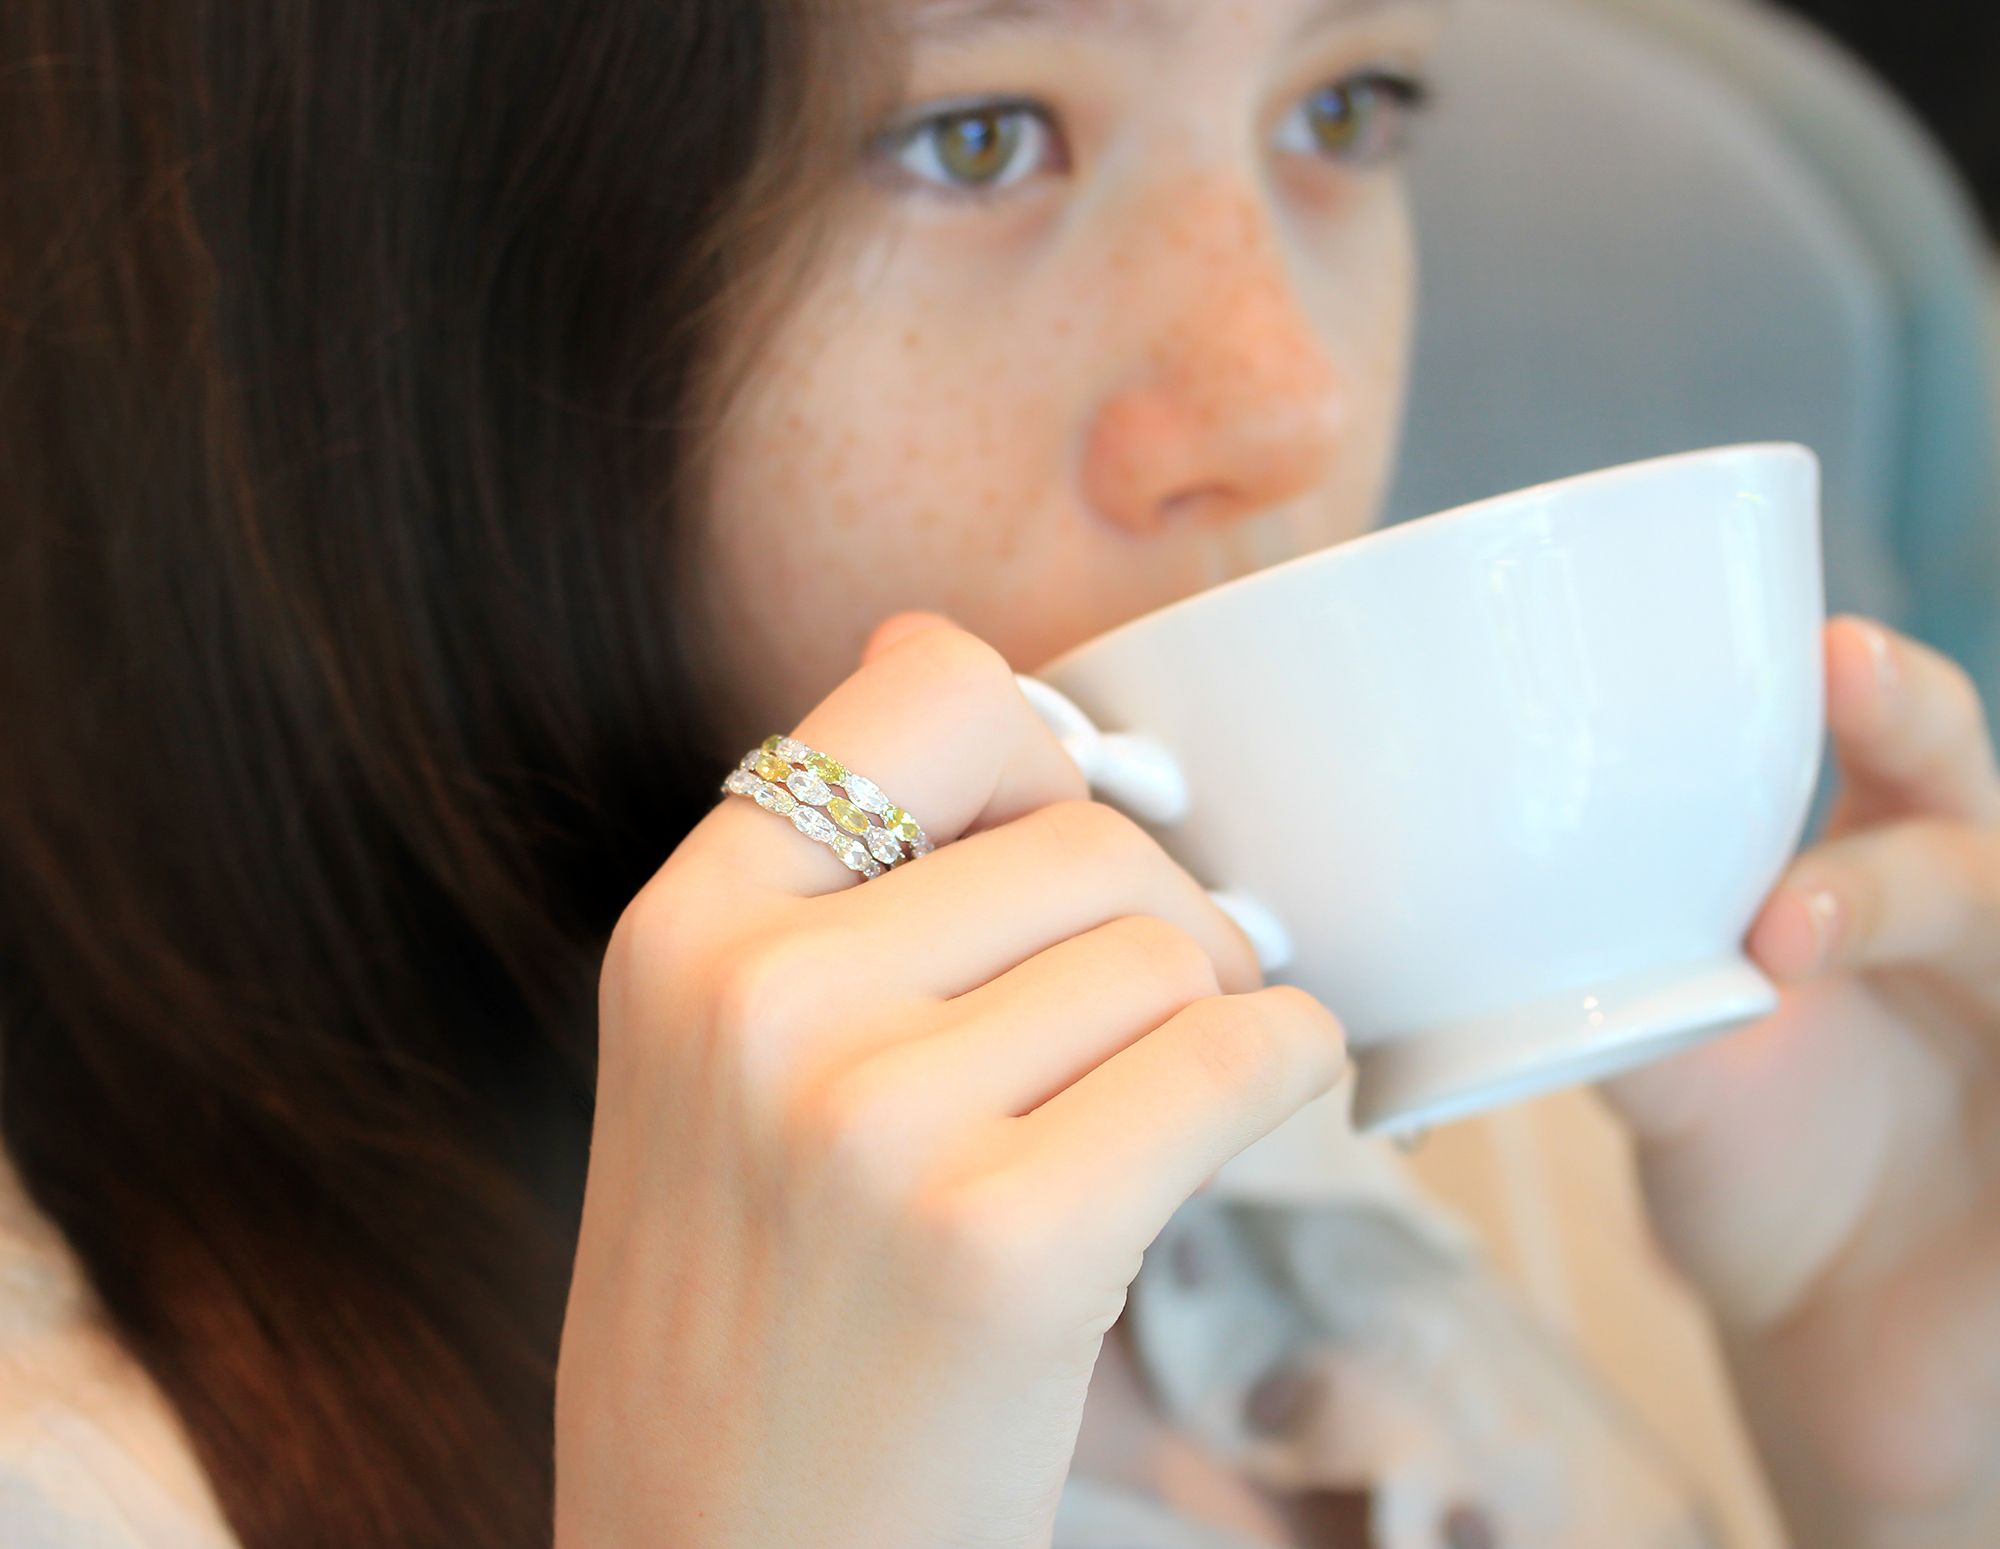 Keep calm, enjoy your tea and dazzle with Siamite eternity rings.